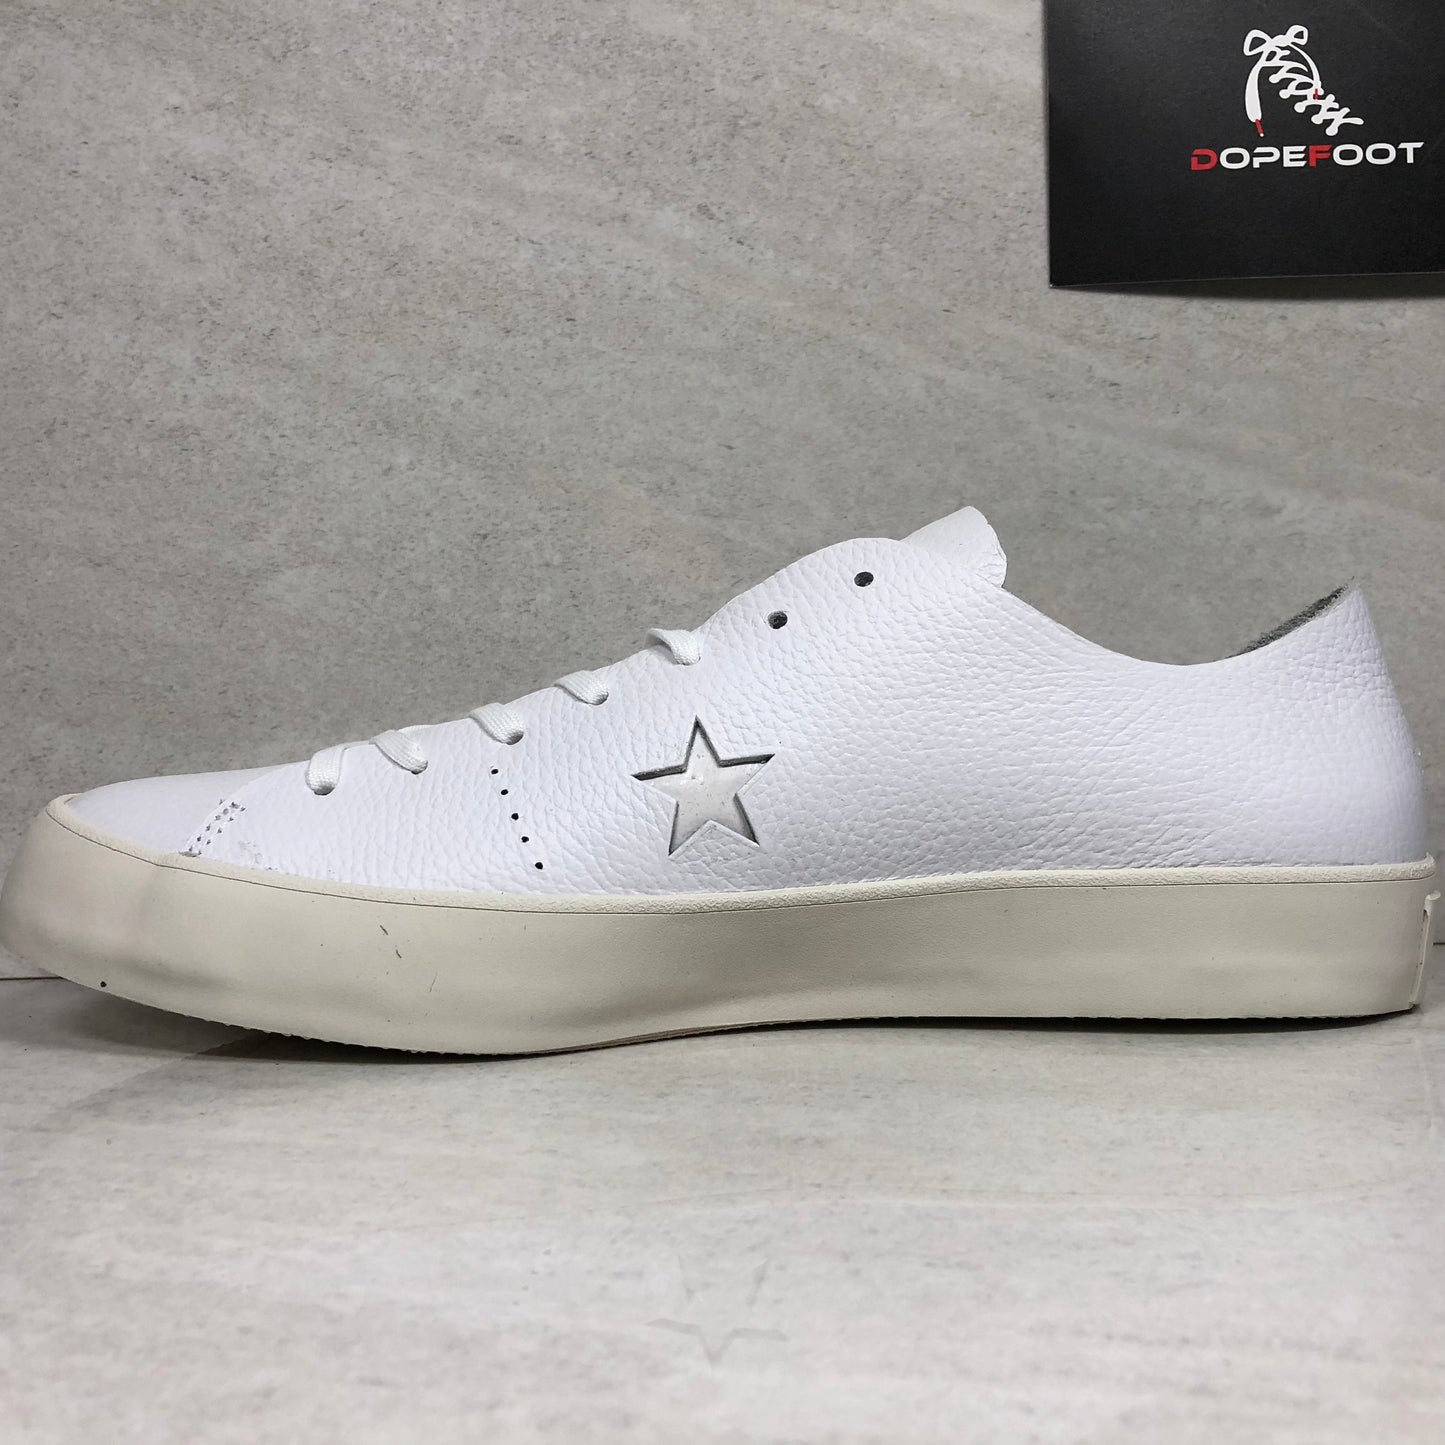 DS Converse One Star Prime Low Top Taille 10.5/Taille 11.5/Taille 12 Blanc 154839C